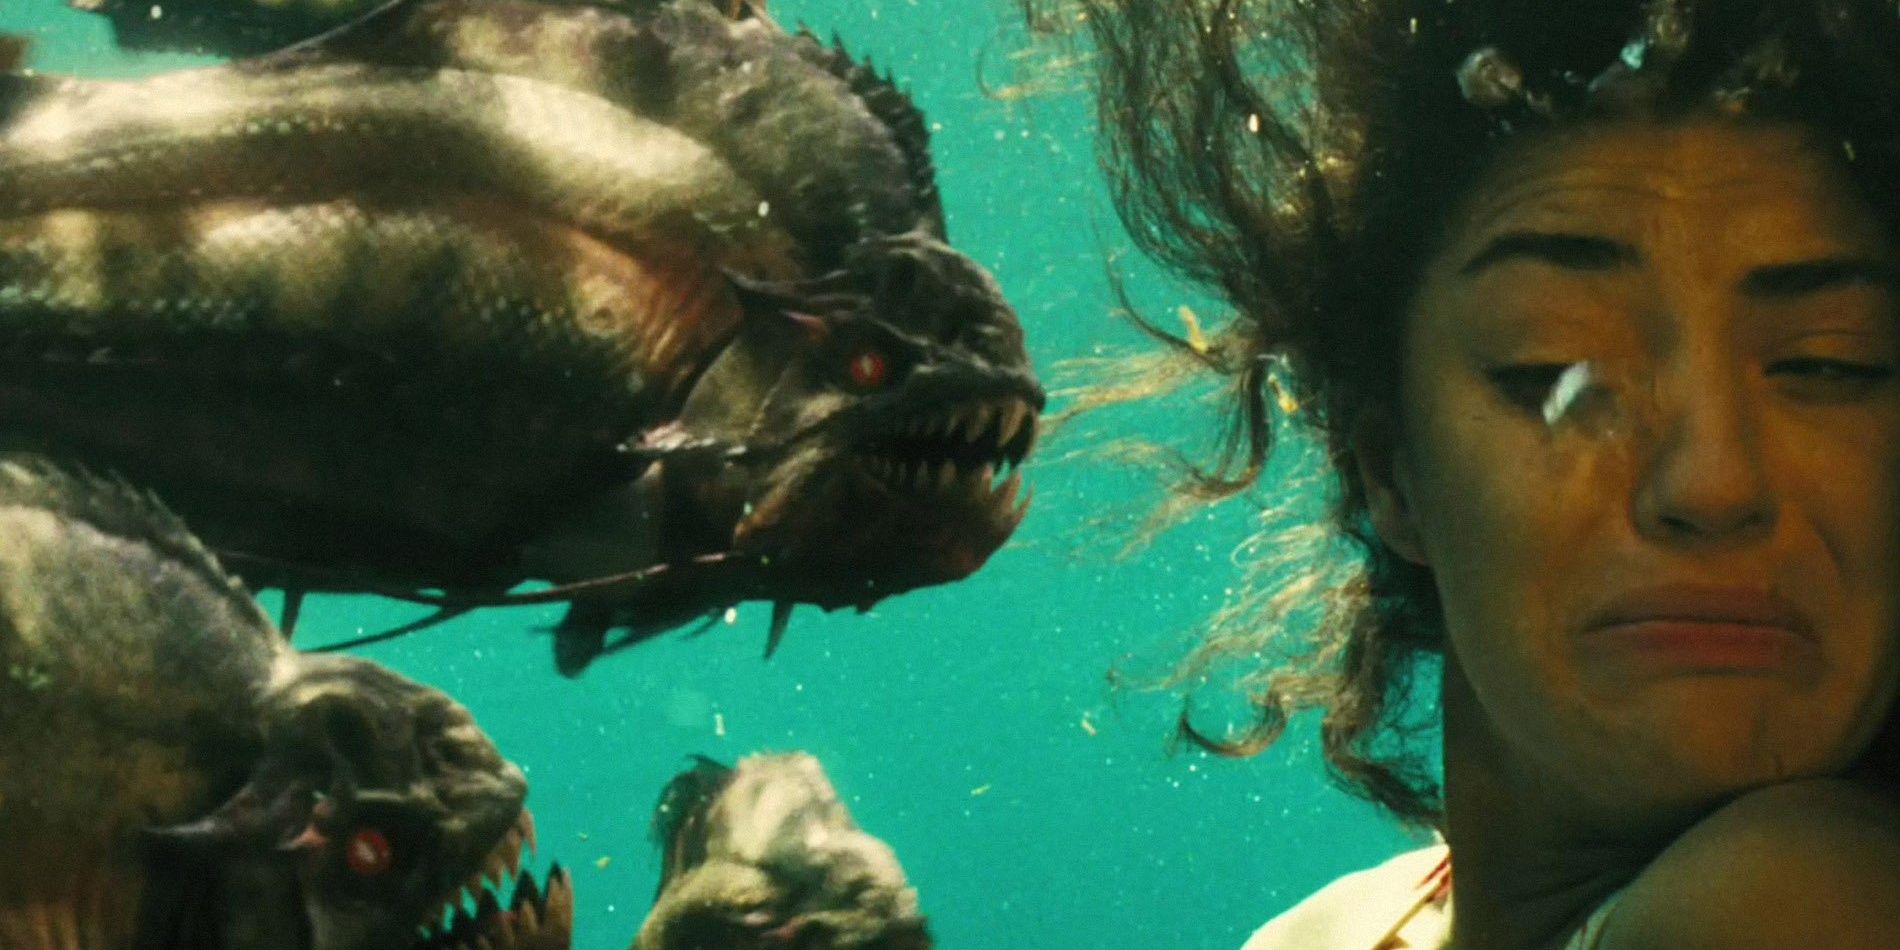 A teen comes face to face with piranha